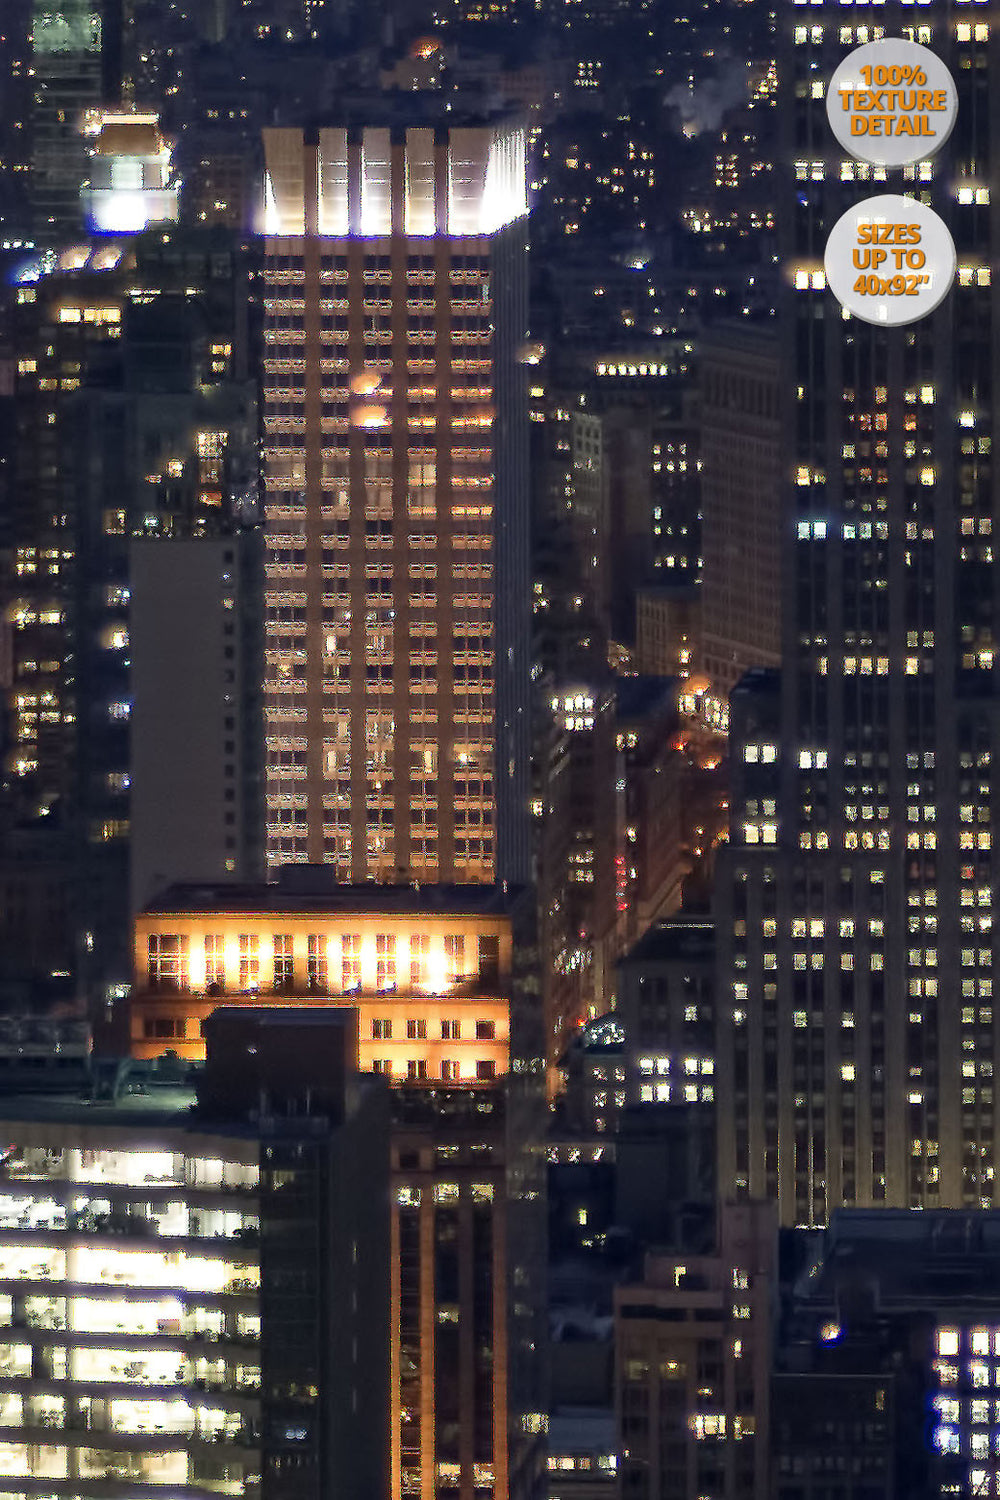 The Empire State Building by night, NYC. | Giant Print Detail at 100% magnification.